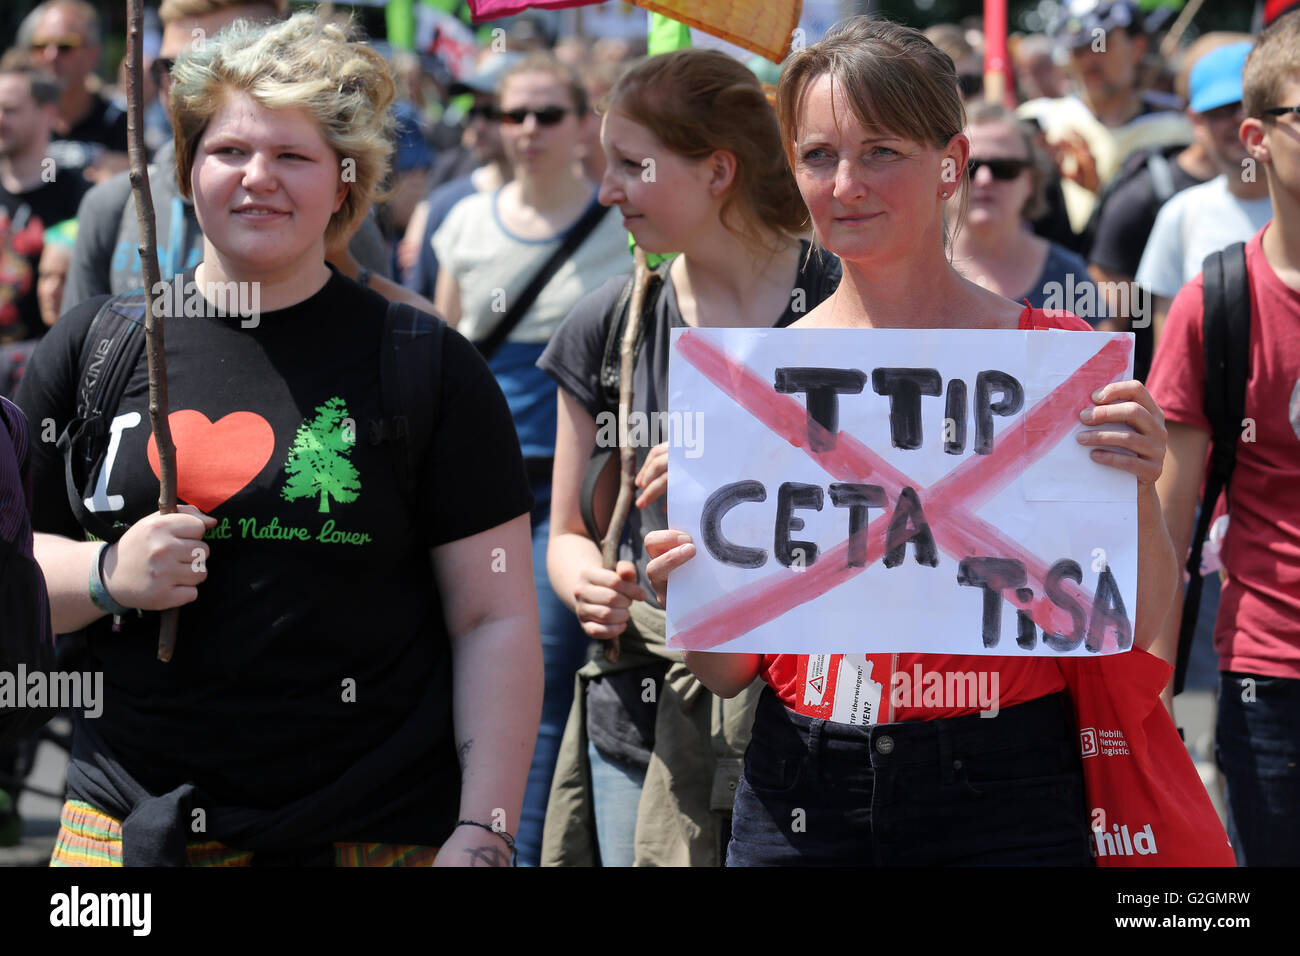 Campaigners against TTIP (Transatlantic Trade and Investment Partnership) hold banner during a demonstration demonstration in Leipzig, Germany, May 2016 Stock Photo